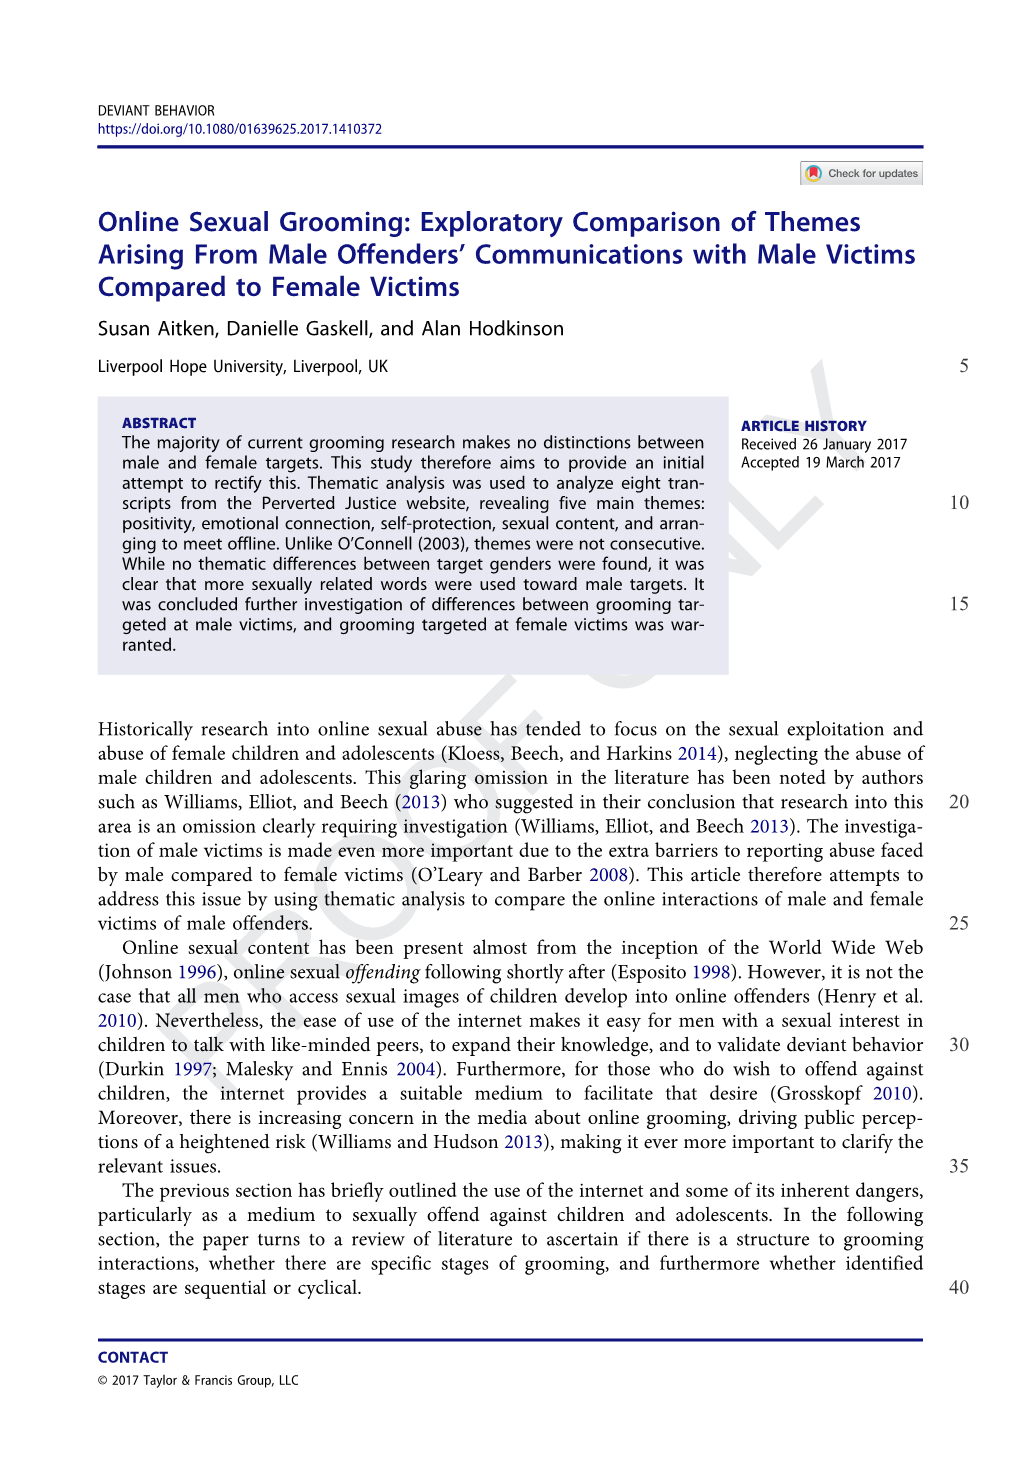 Online Sexual Grooming: Exploratory Comparison of Themes Arising from Male Offenders' Communications with Male Victims Compare